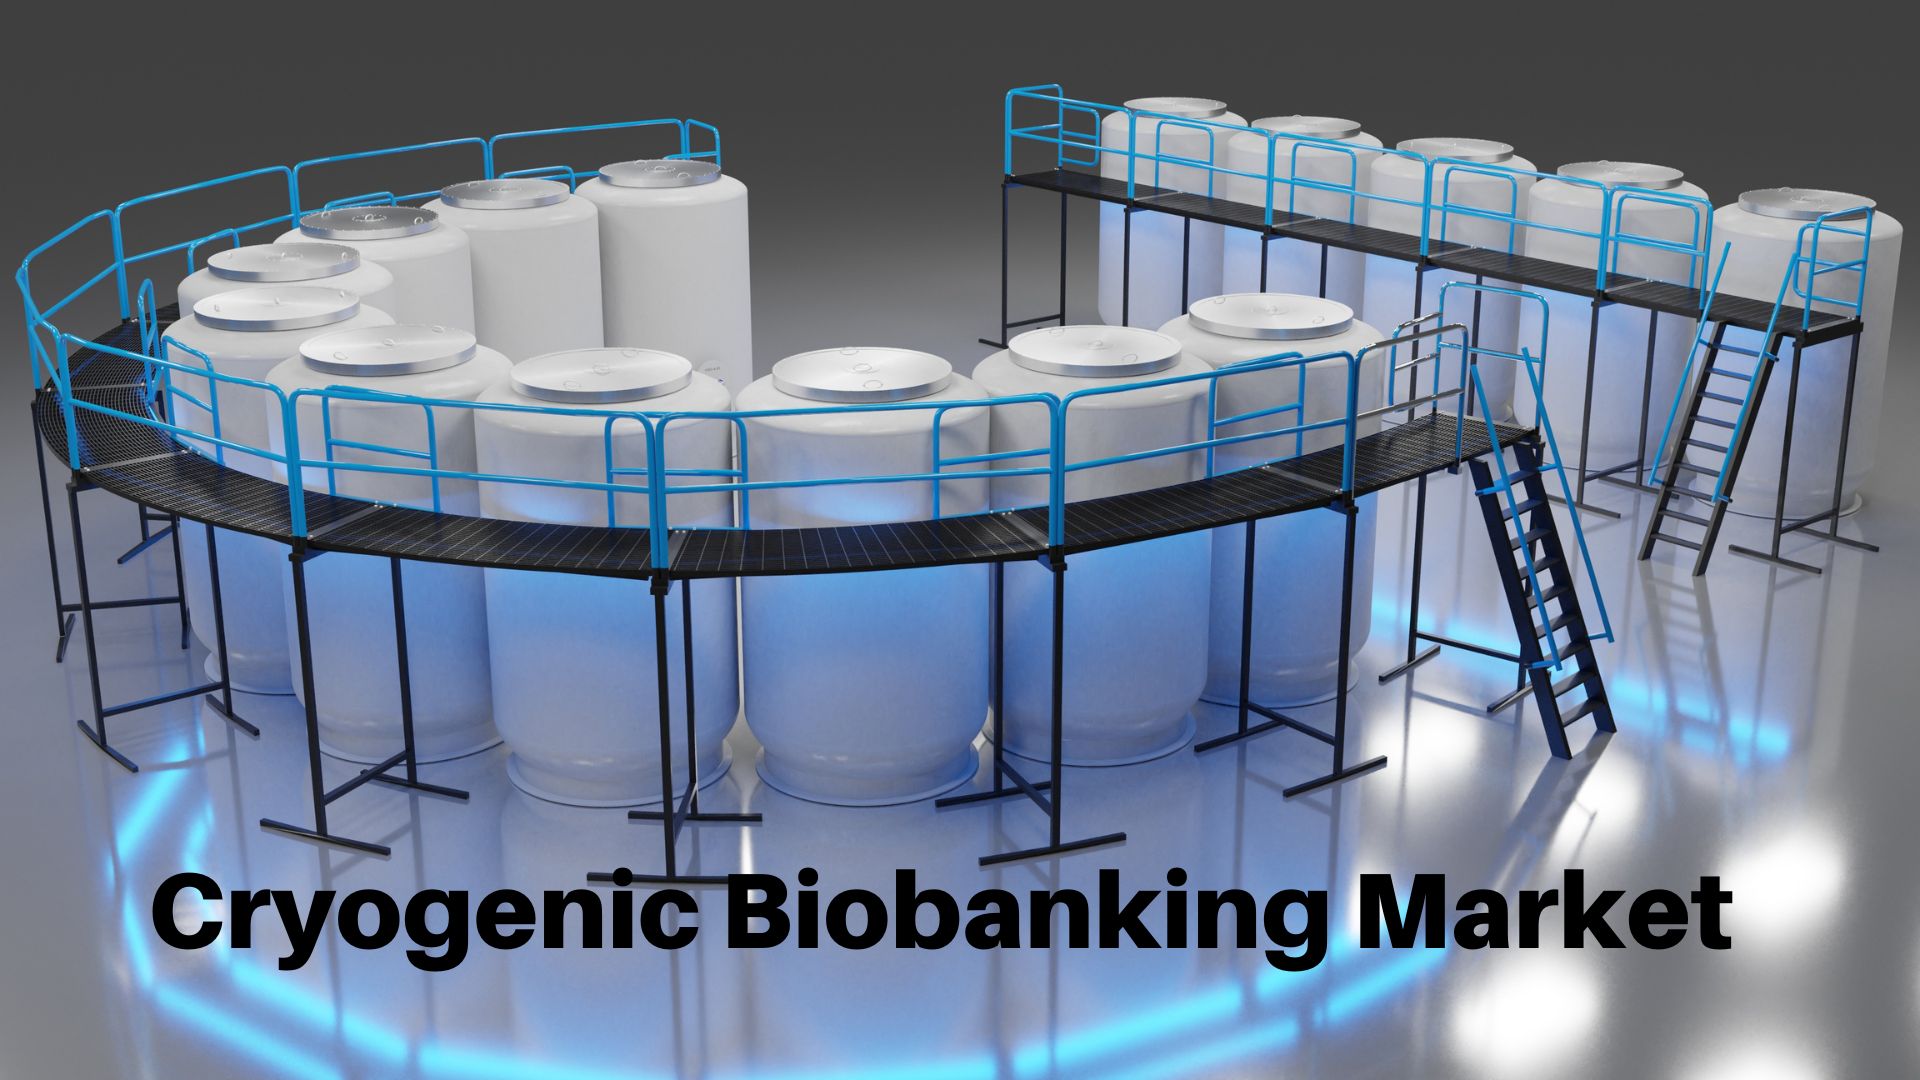 Cryogenic Biobanking Services Market Size is Expected to Reach Over USD 28.56 Bn by 2032